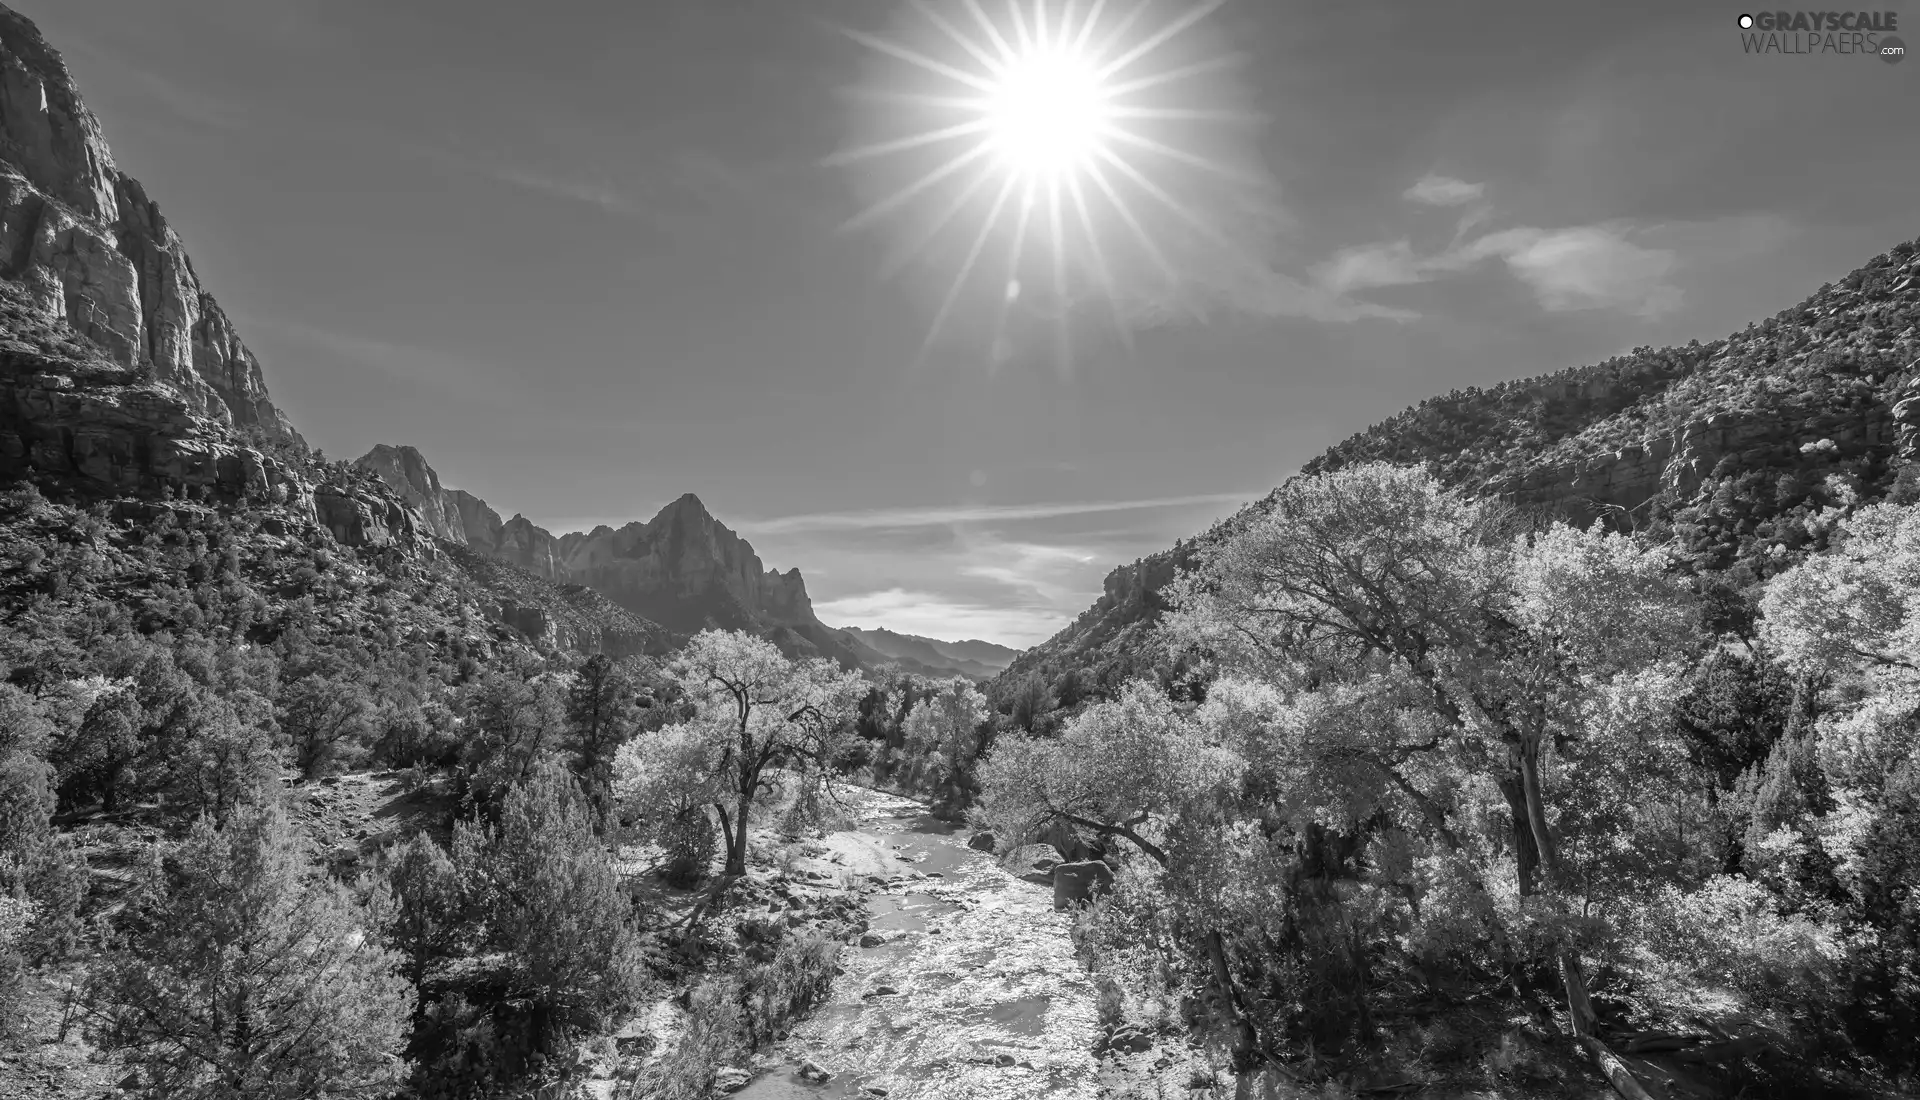 Utah State, The United States, Zion National Park, Watchman Mountains, viewes, rays of the Sun, Stones, trees, Virgin River